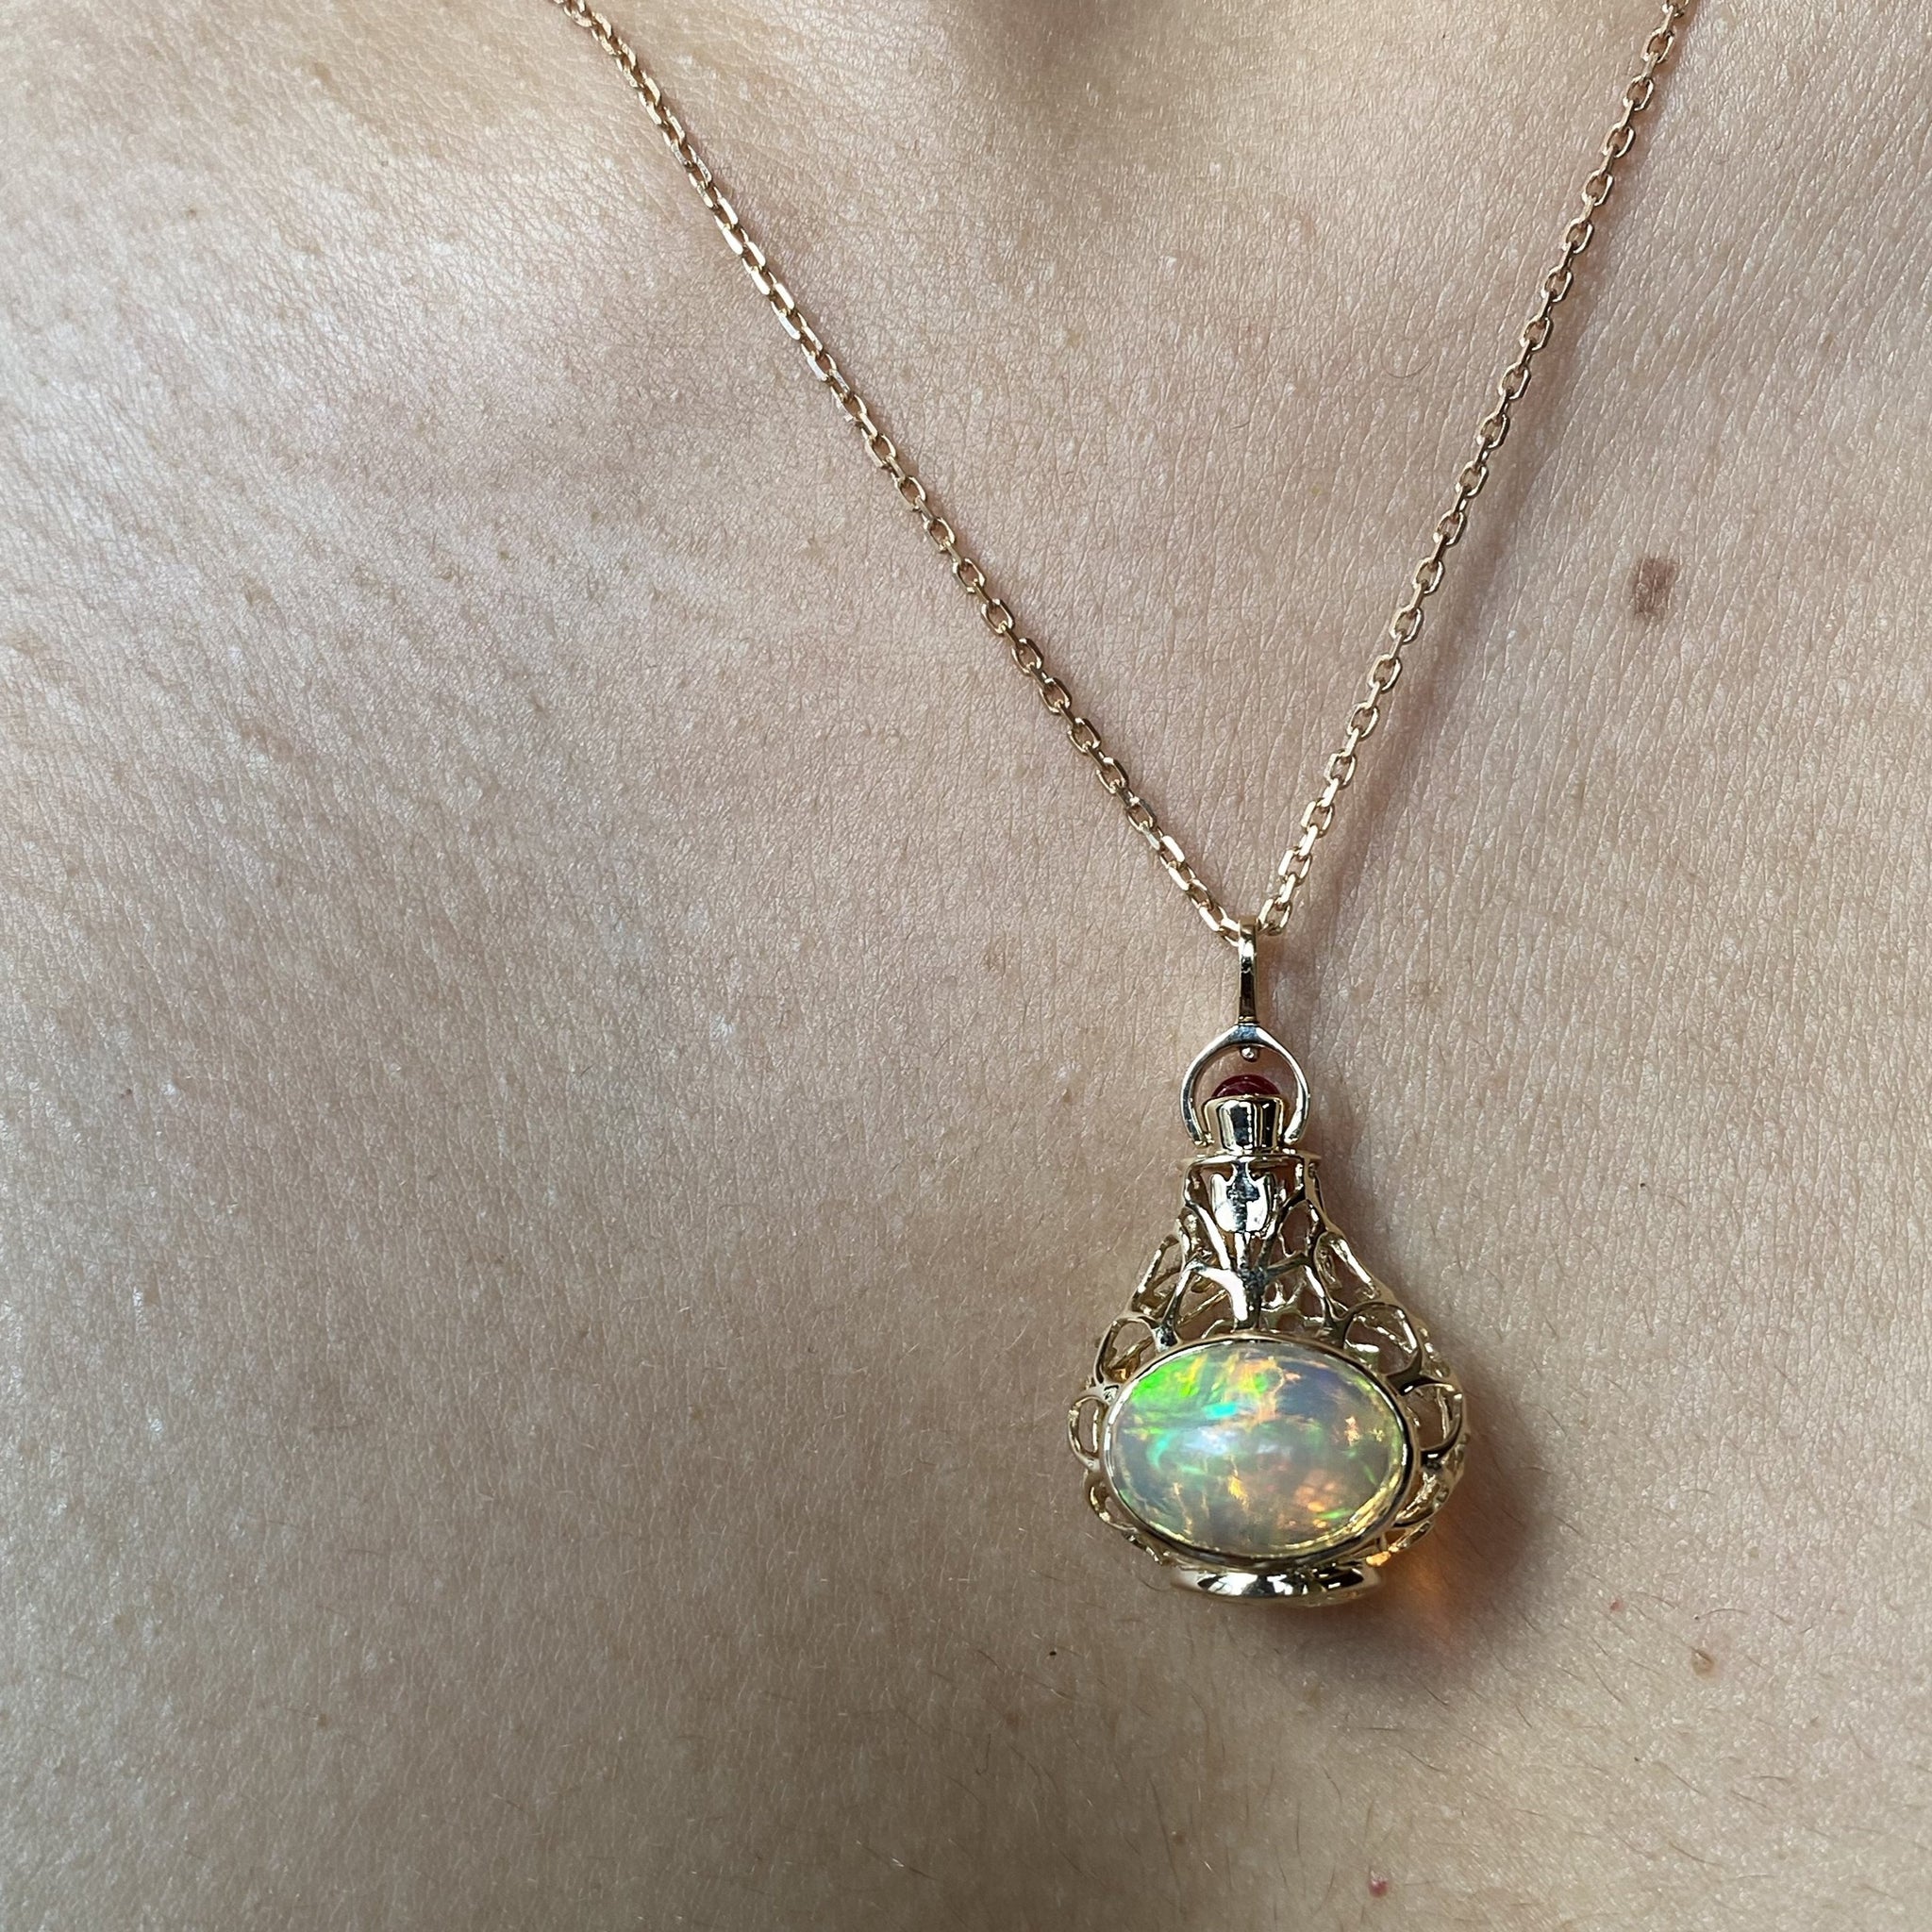 Glass Floating Opal Necklace • Sterling Silver 10mm Round Glass Floating  Opal Cremation Ash Necklace - Sugarberry Memorials